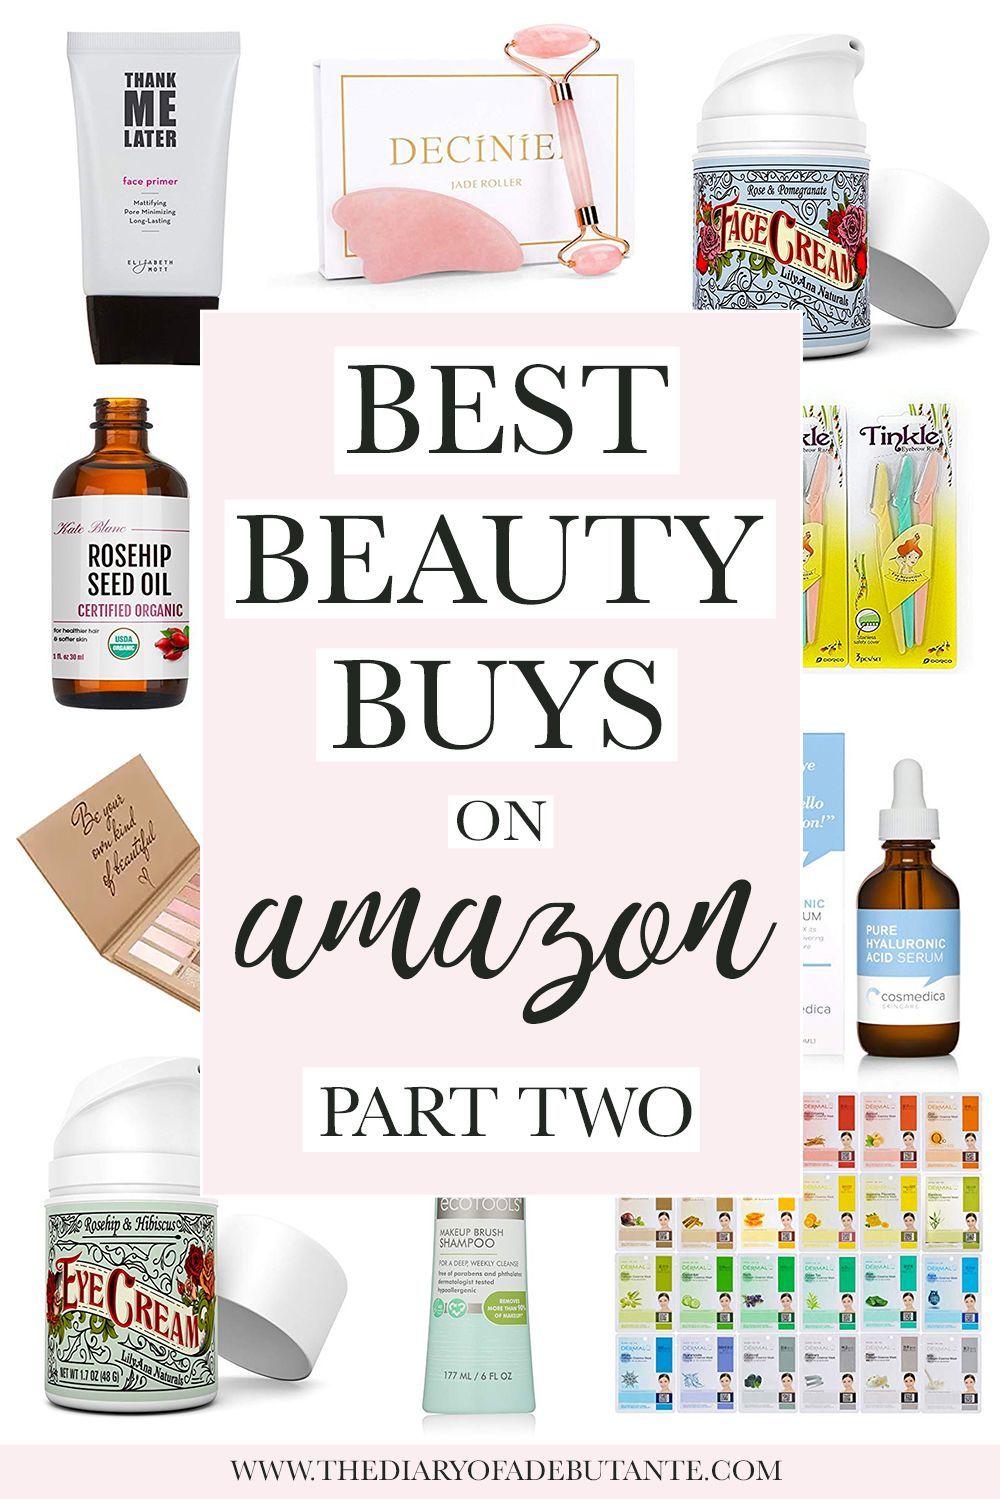 12 of the Best Beauty Products on Amazon: 2019 Edition - 12 of the Best Beauty Products on Amazon: 2019 Edition -   19 top beauty Products ideas